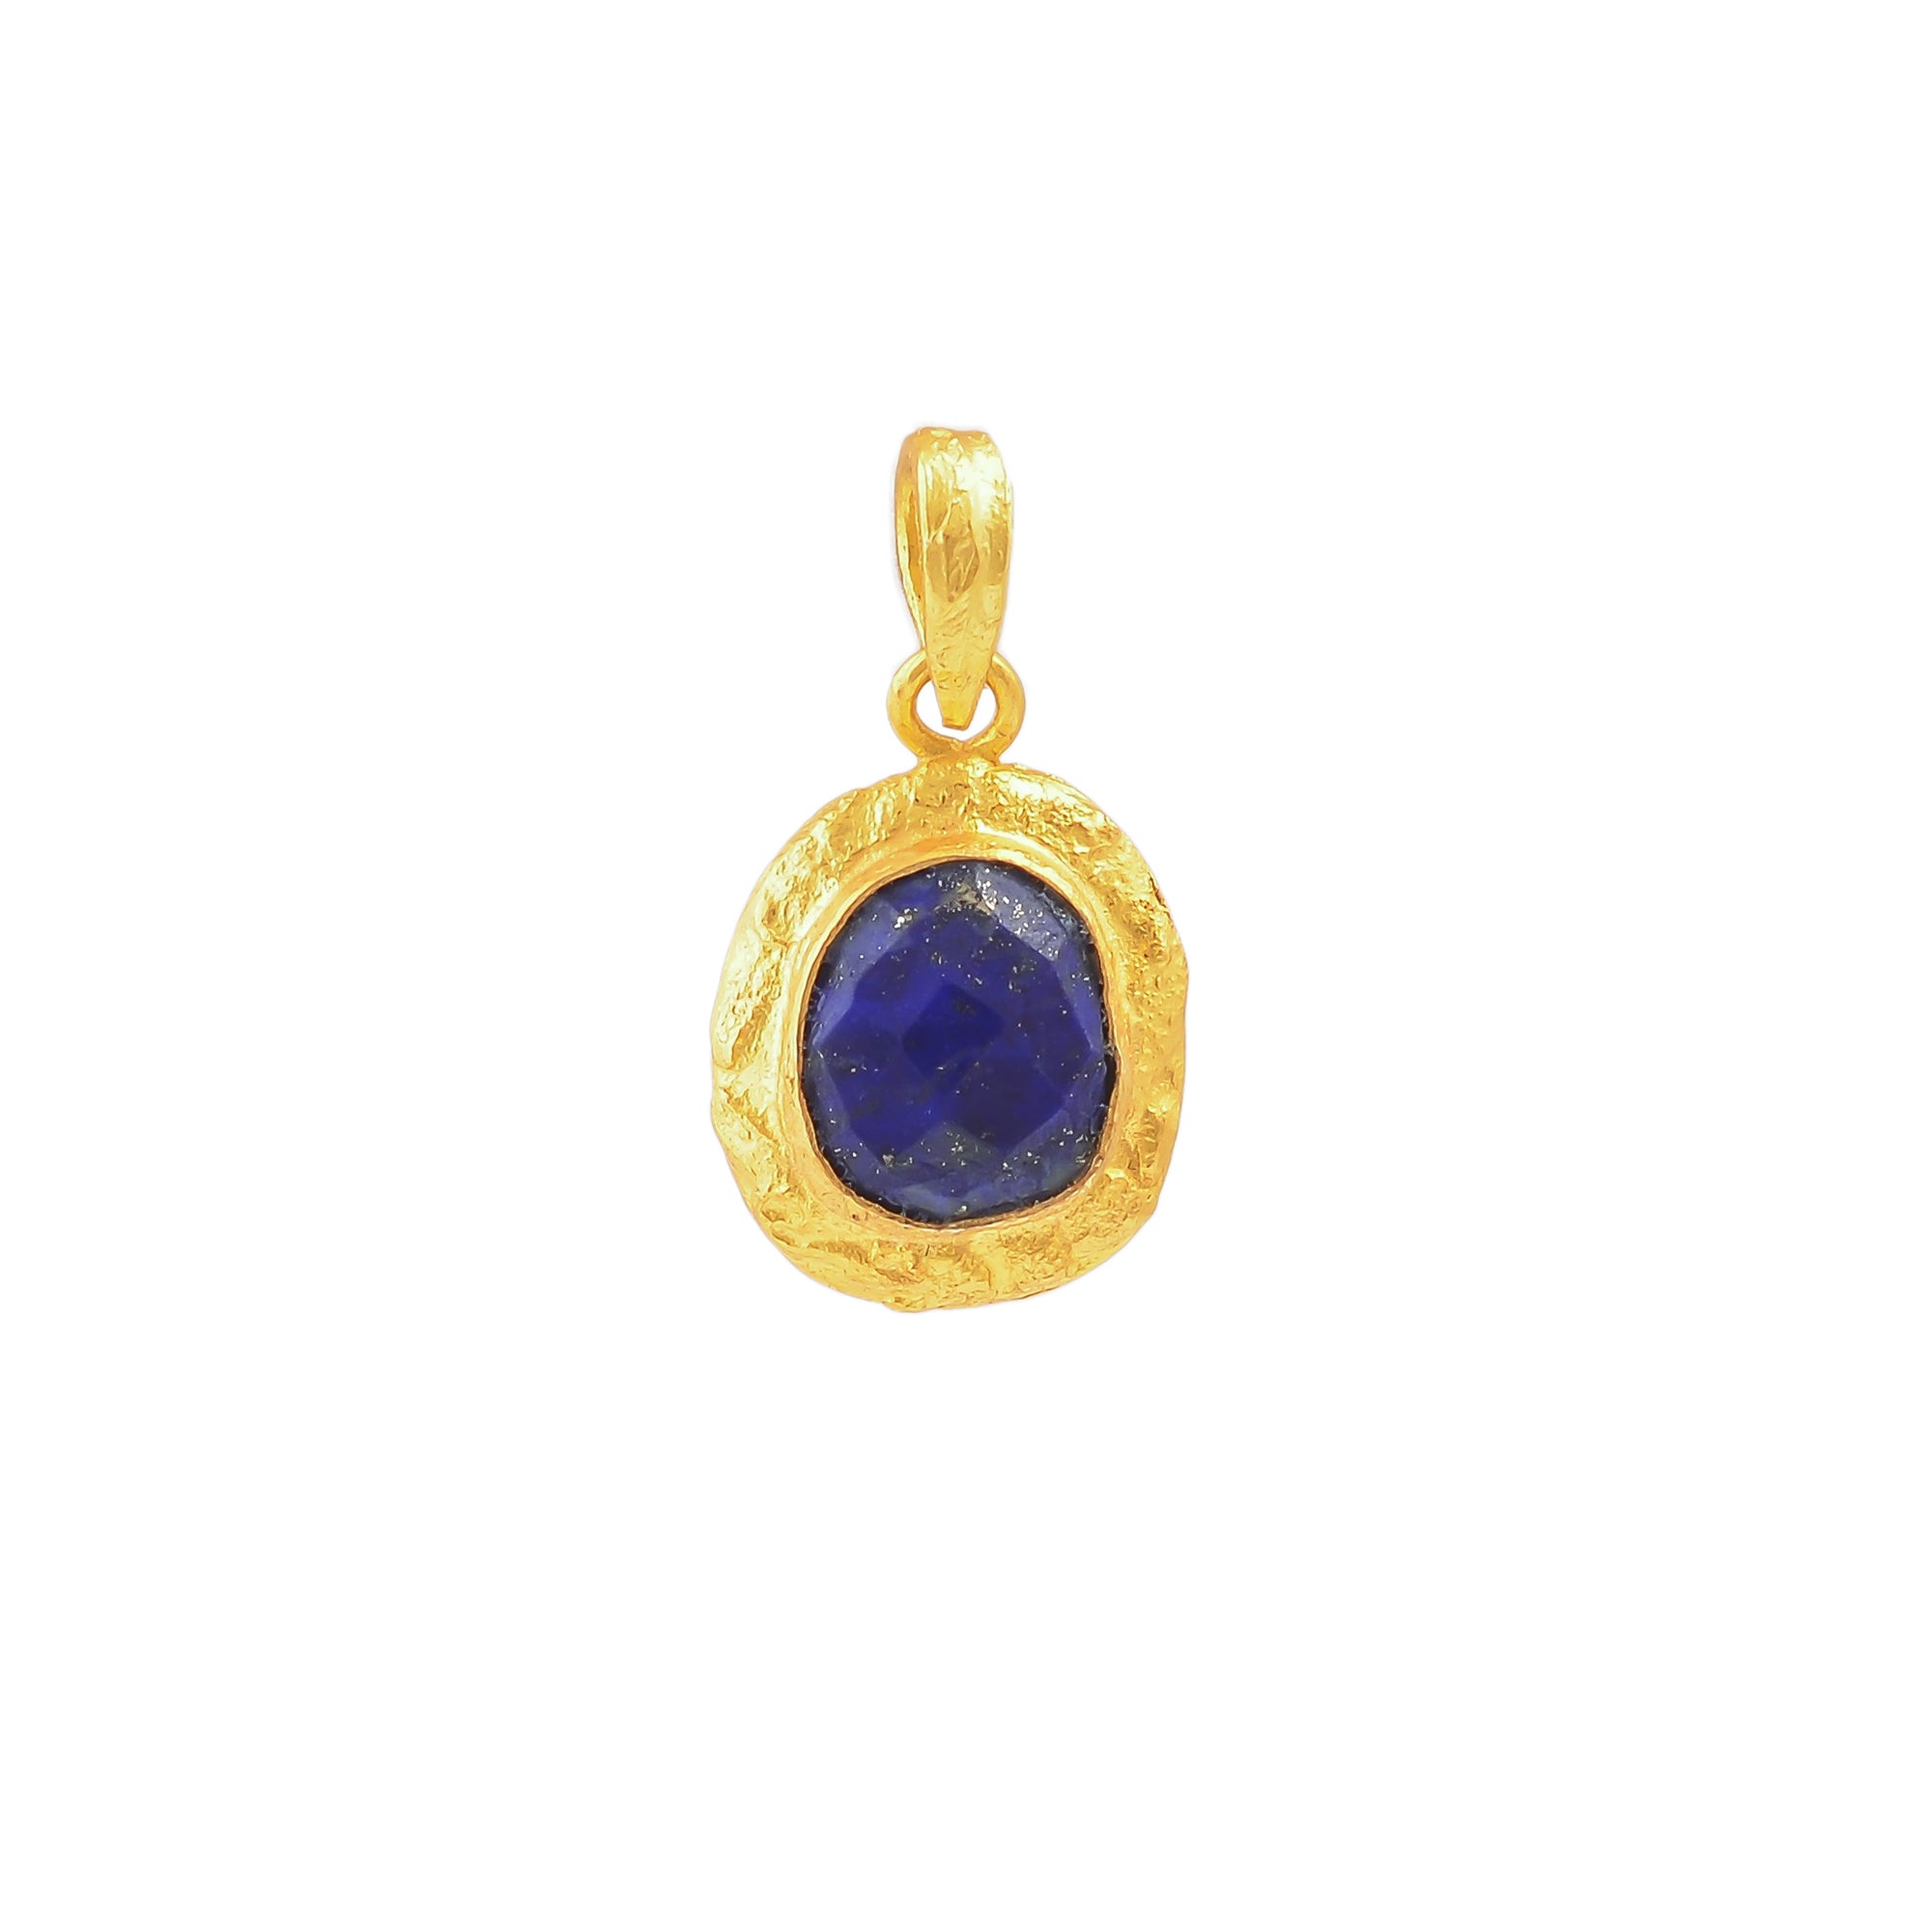 Buy Indian Handcrafted Silver Gold Plated Lapis Pendant